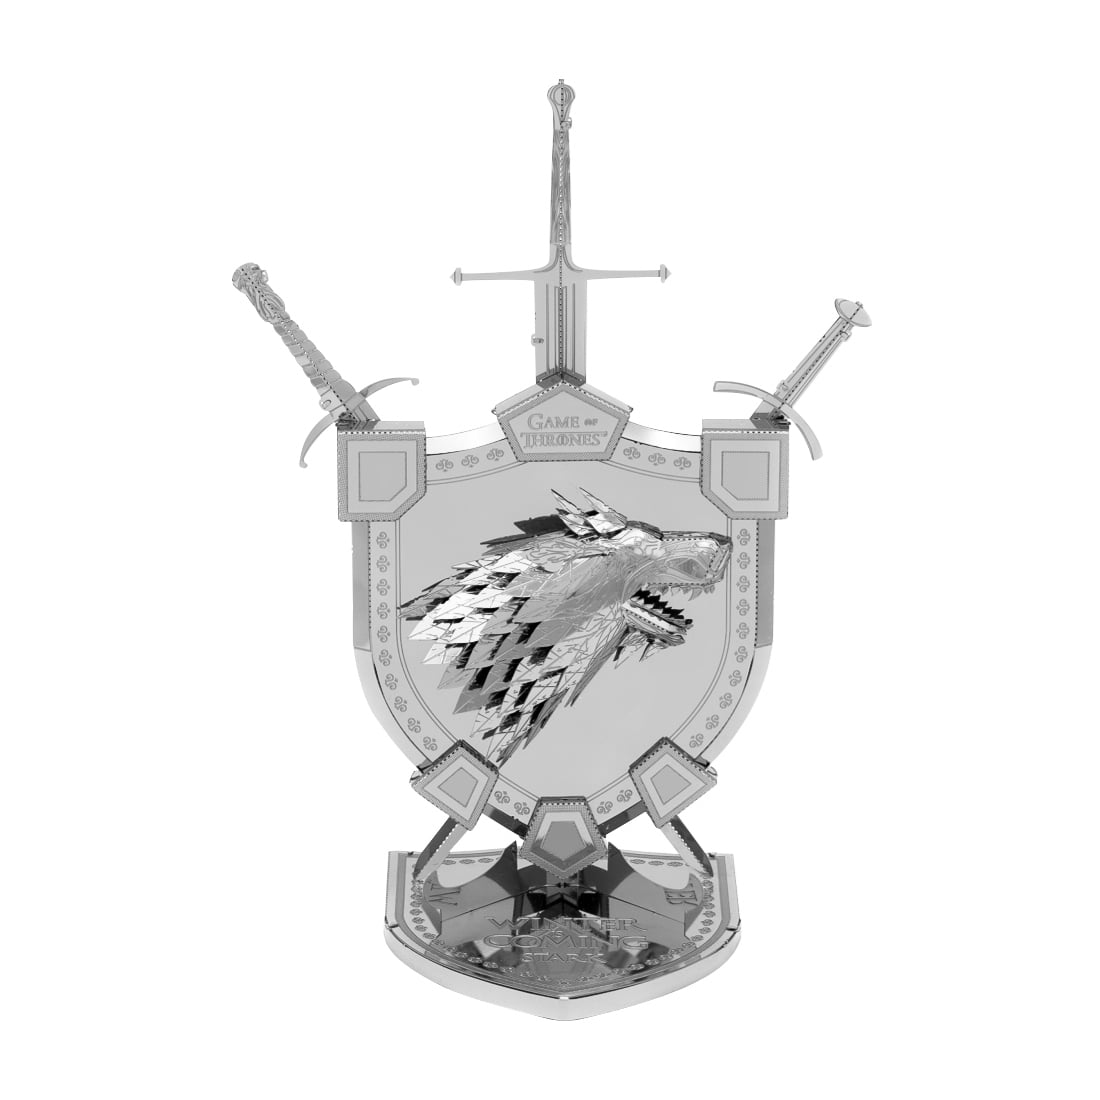 Fascinations ICONX Game of Thrones HOUSE STARK SIGIL 3D Metal Earth Model Kit 